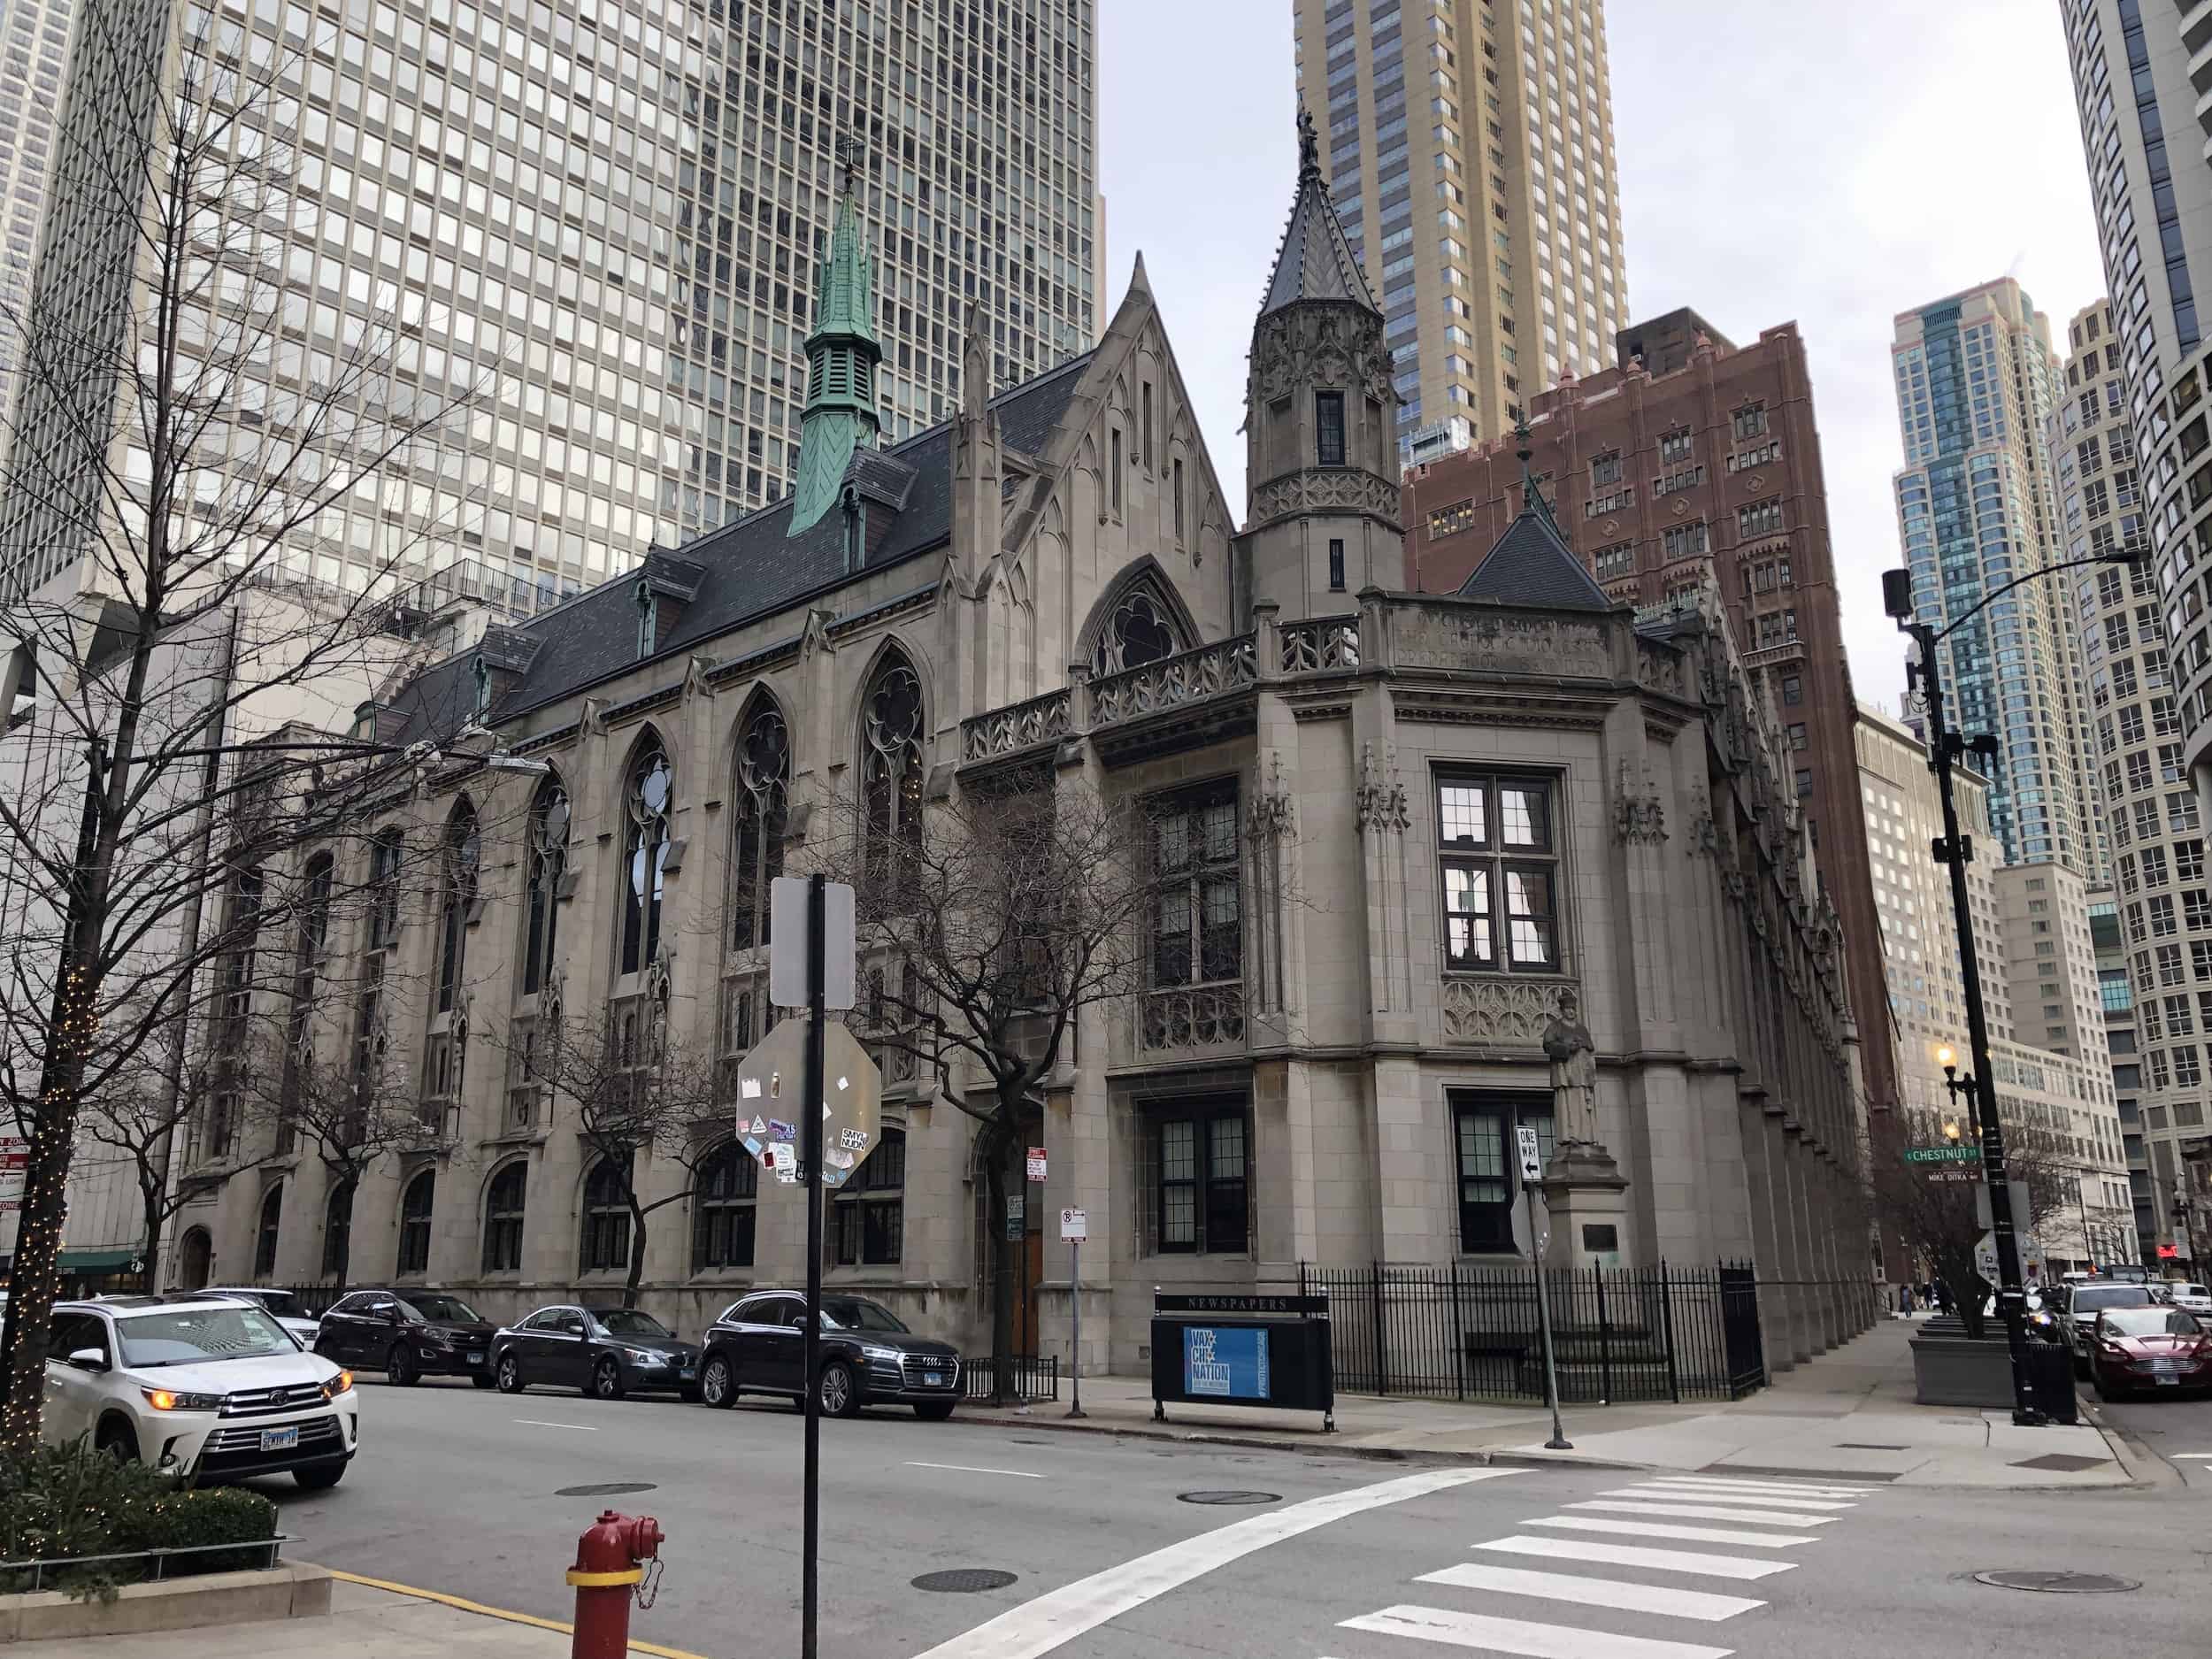 Archbishop Quigley Center at Rush and Division in Chicago, Illinois